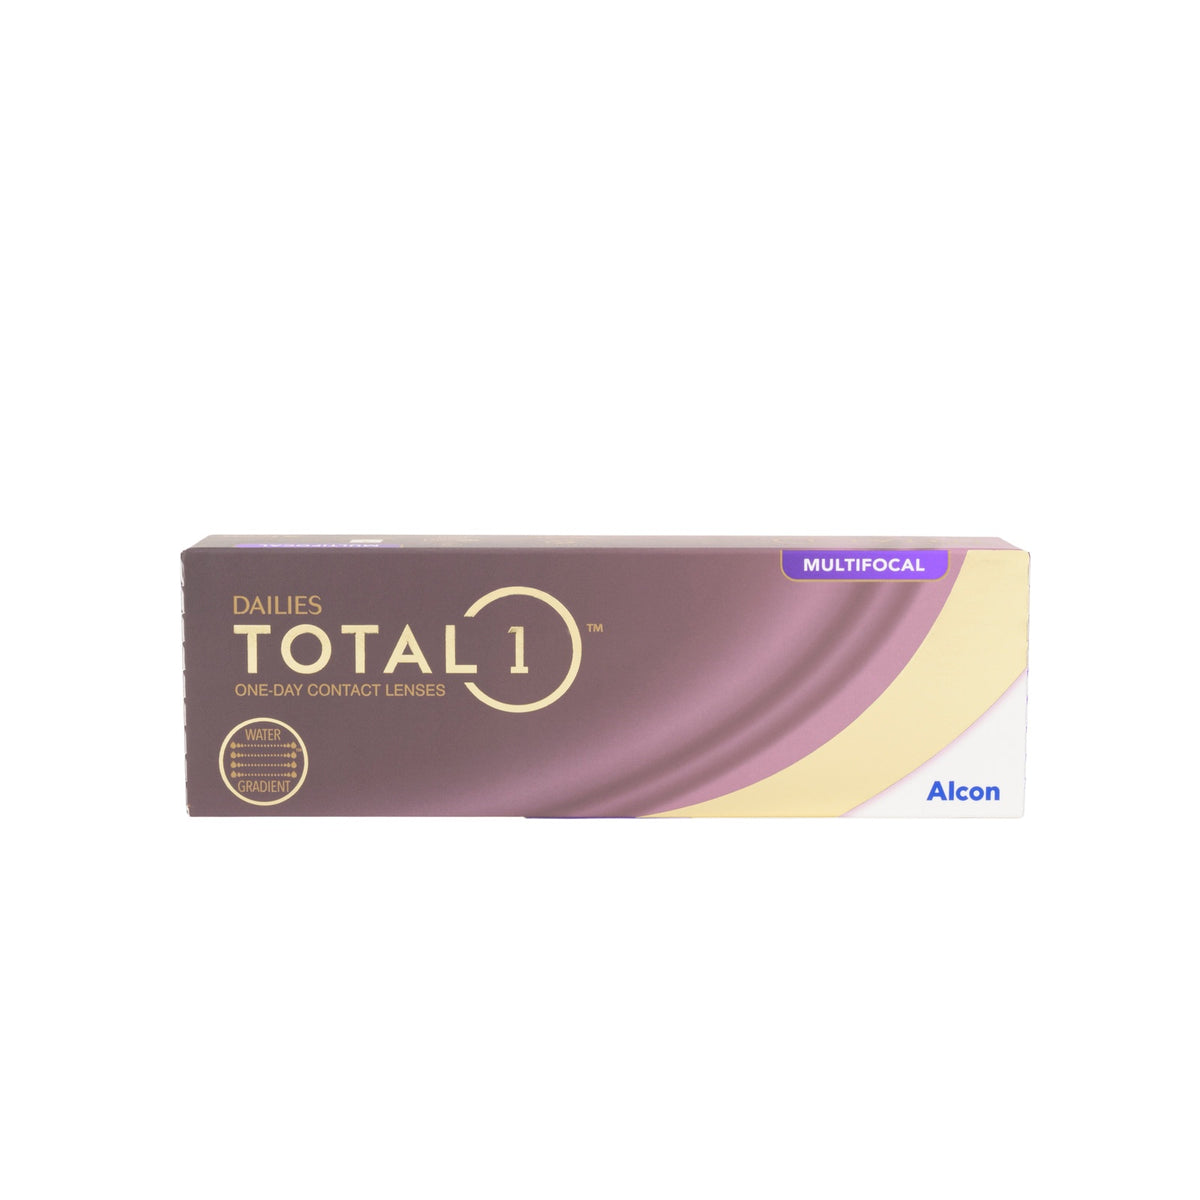 Dailies Total 1 Multifocal 30P Contact Lenses Alcon   